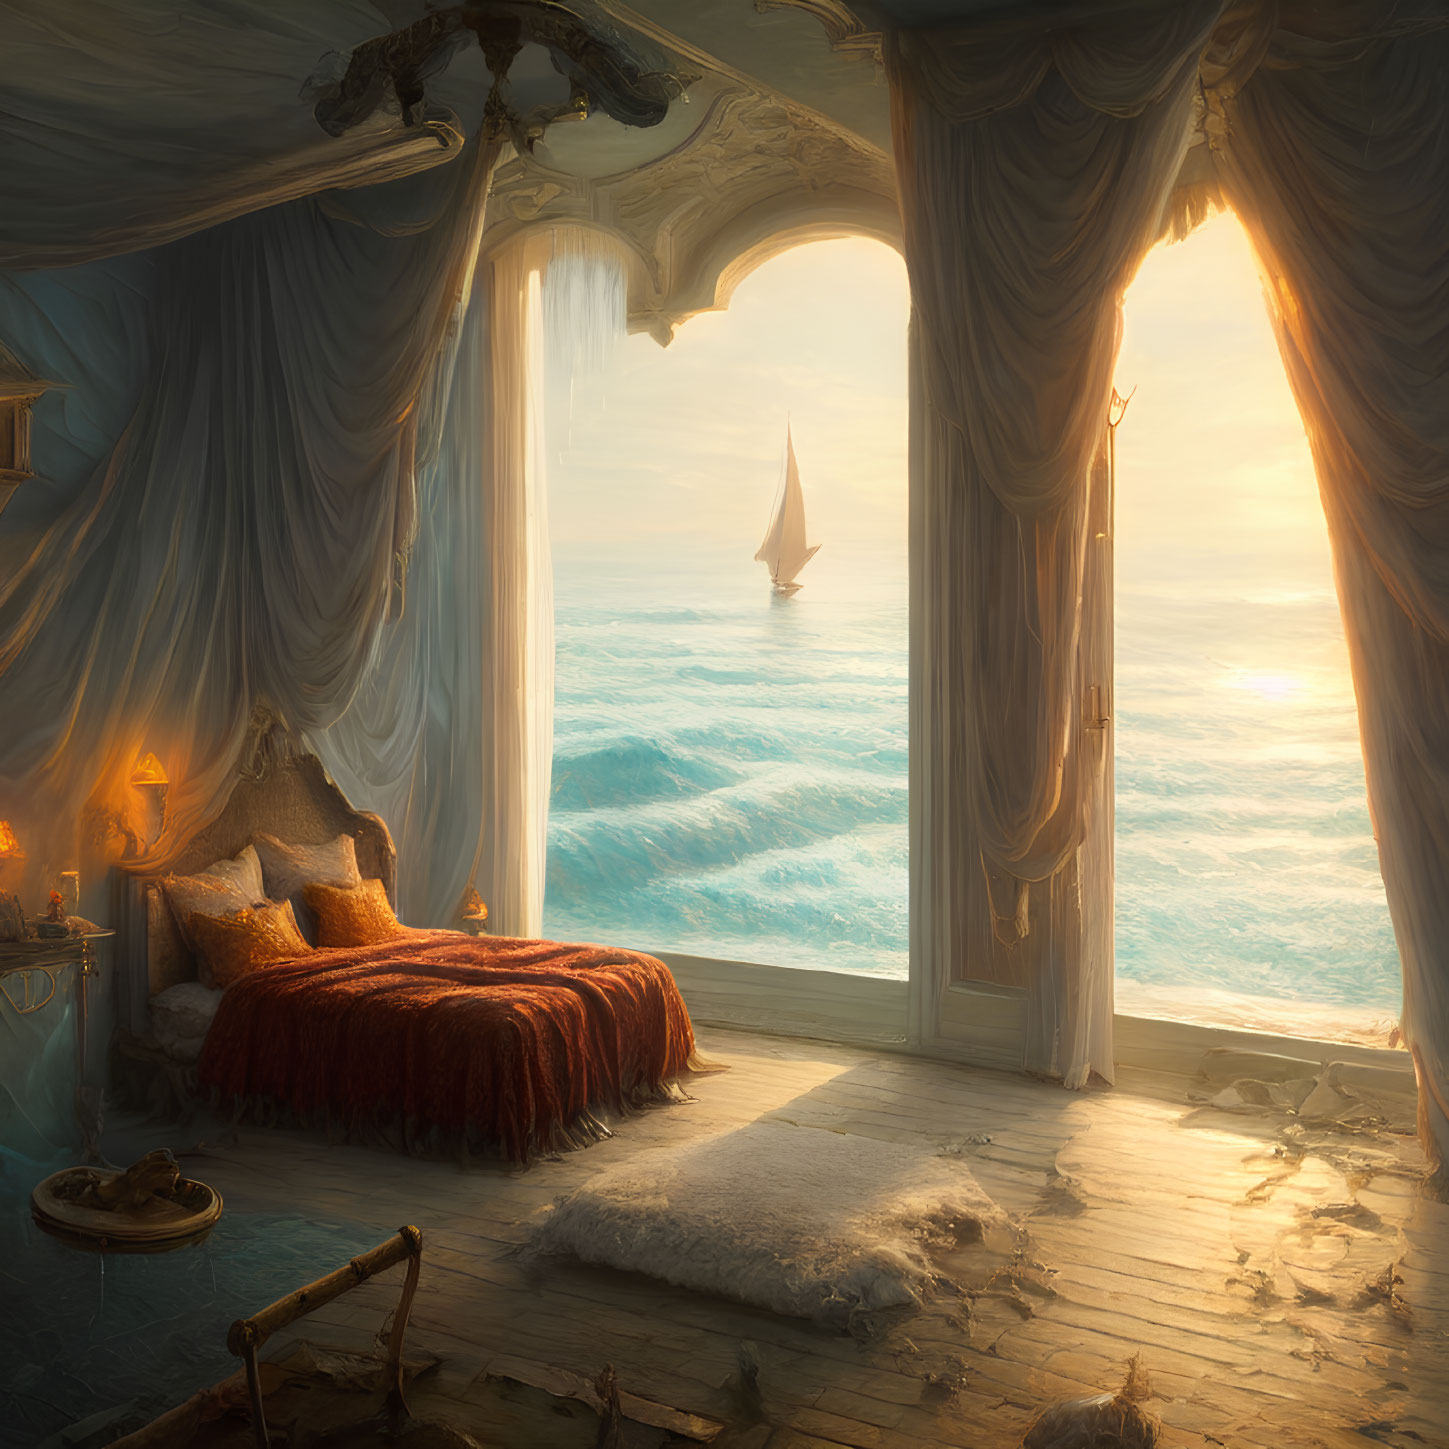 Tranquil bedroom scene transitions to stormy sea with sailboat at sunrise or sunset